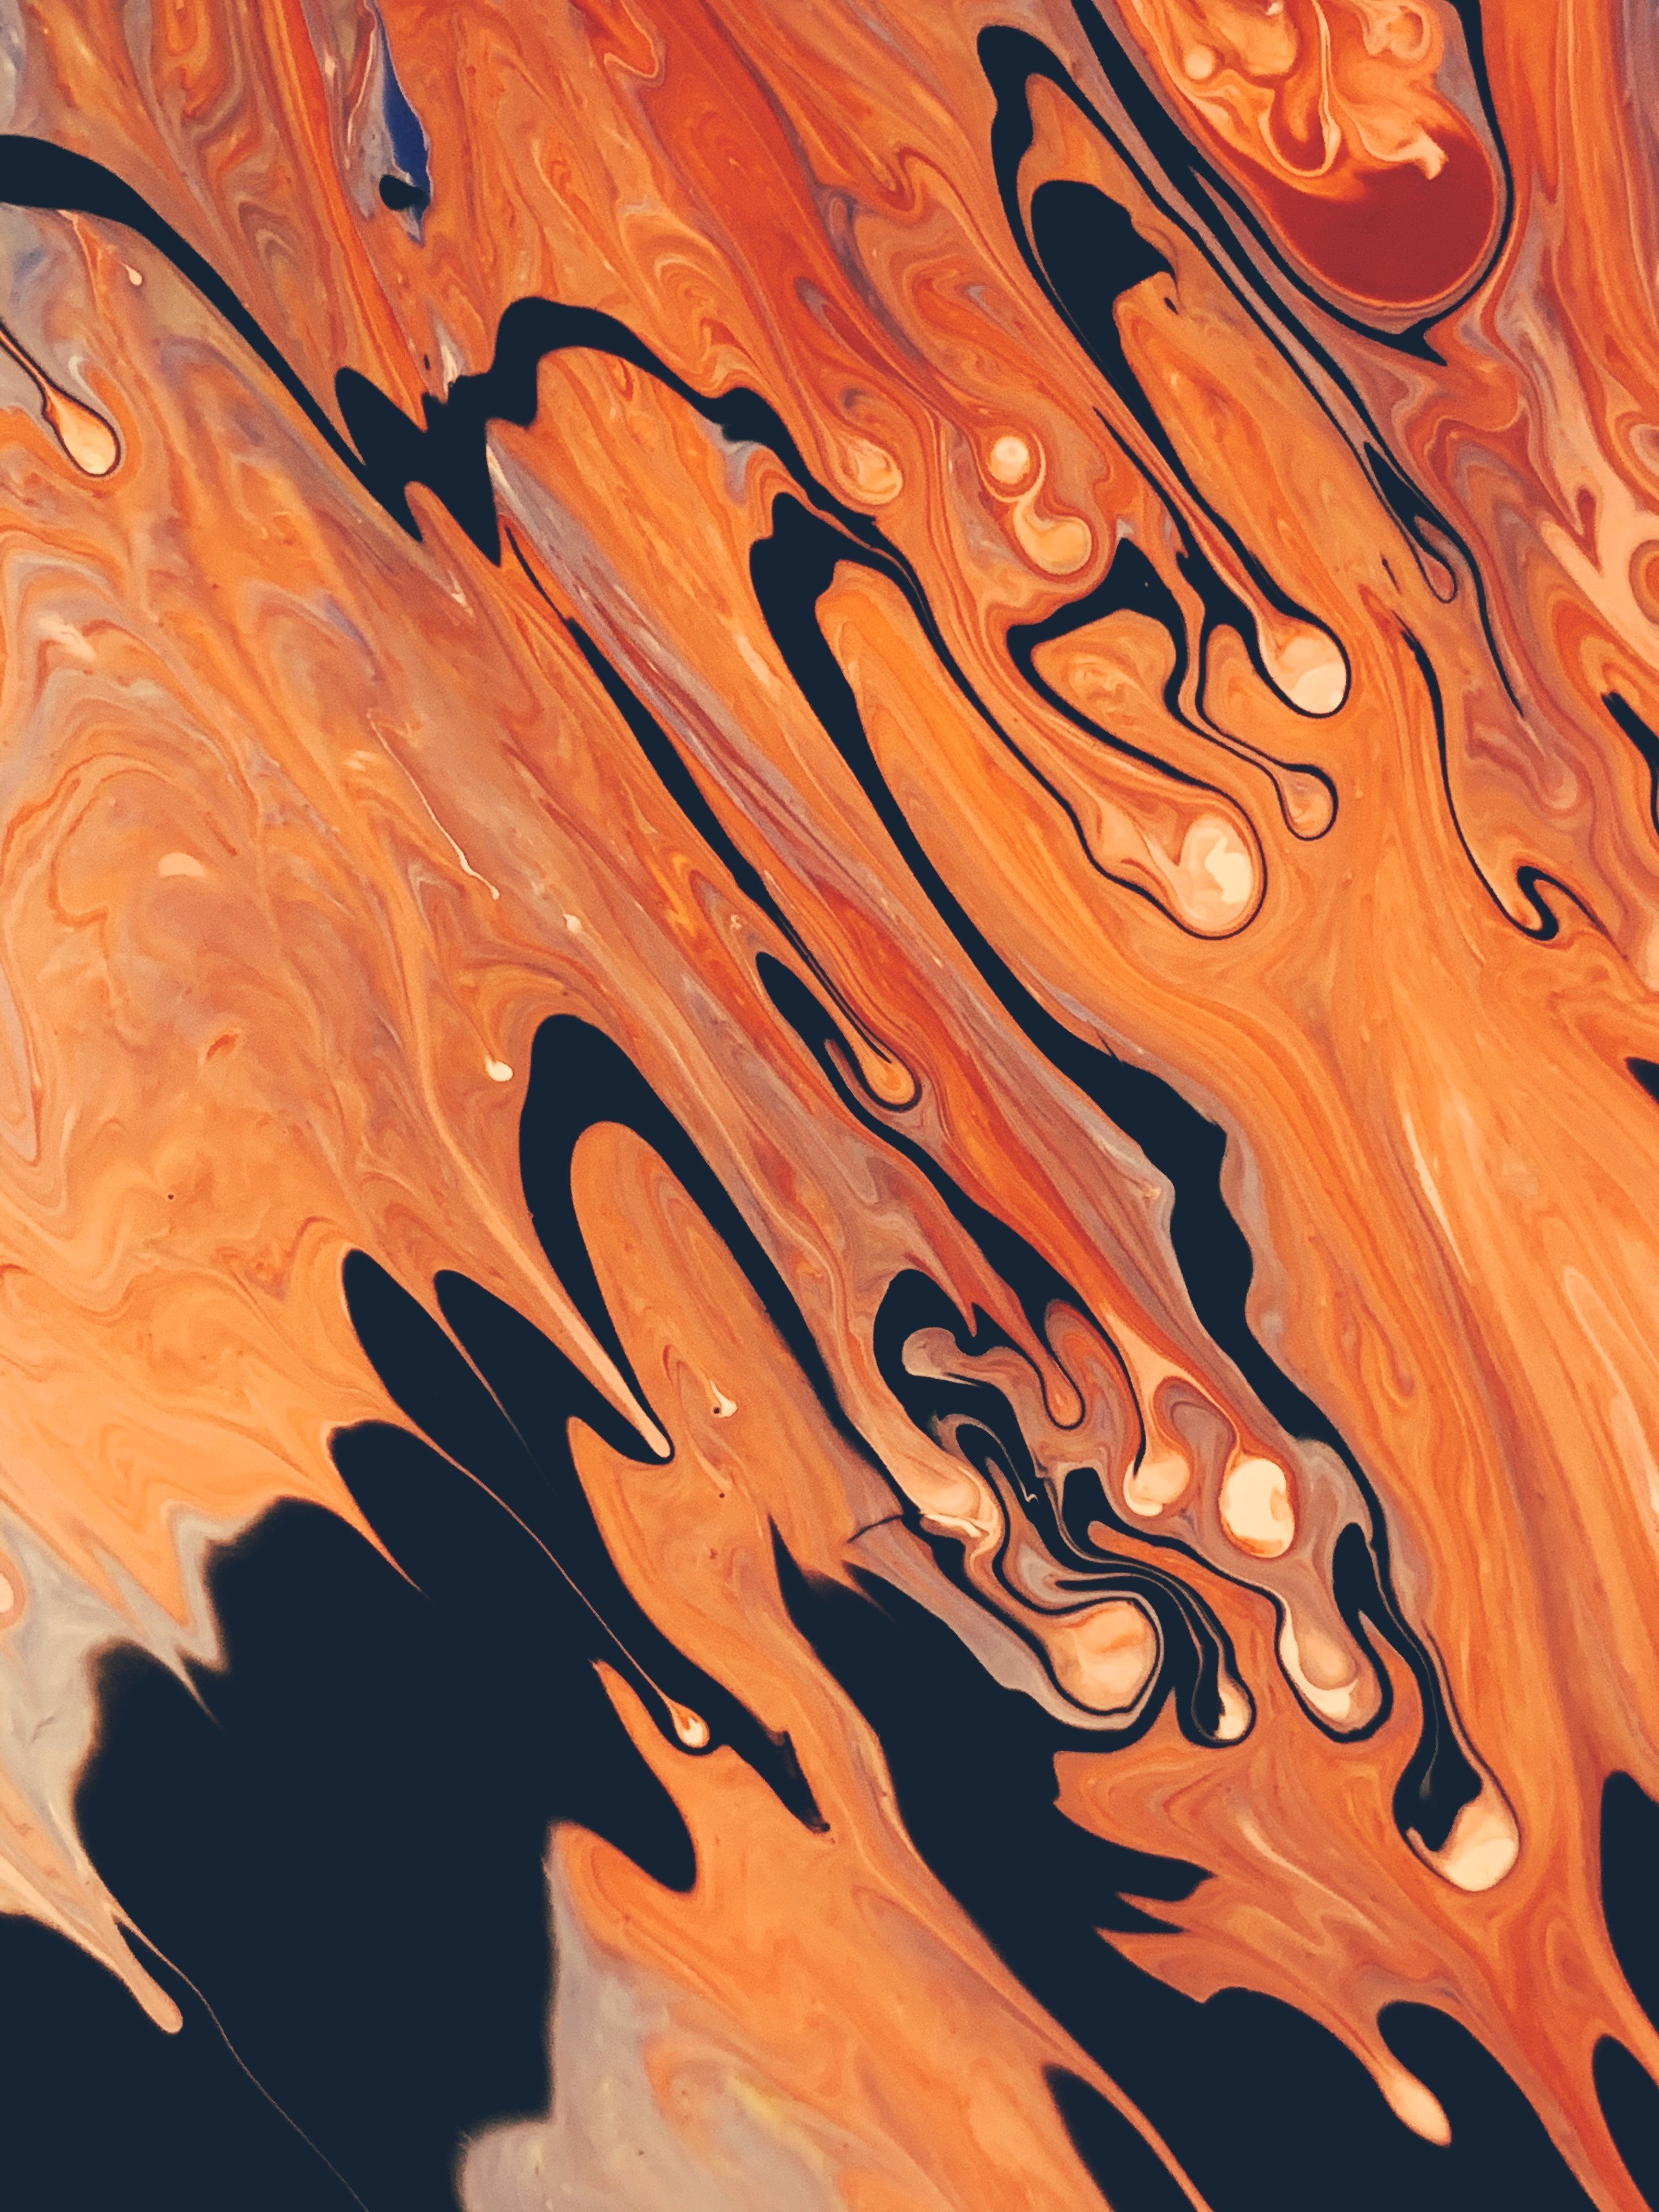 A close up of an orange and black abstract painting - Vintage, clean, neon orange, orange, pastel orange, Android, vintage fall, modern, bling, YouTube, VSCO, love, retro, profile picture, HD, pattern, landscape, dark orange, abstract, cool, phone, art